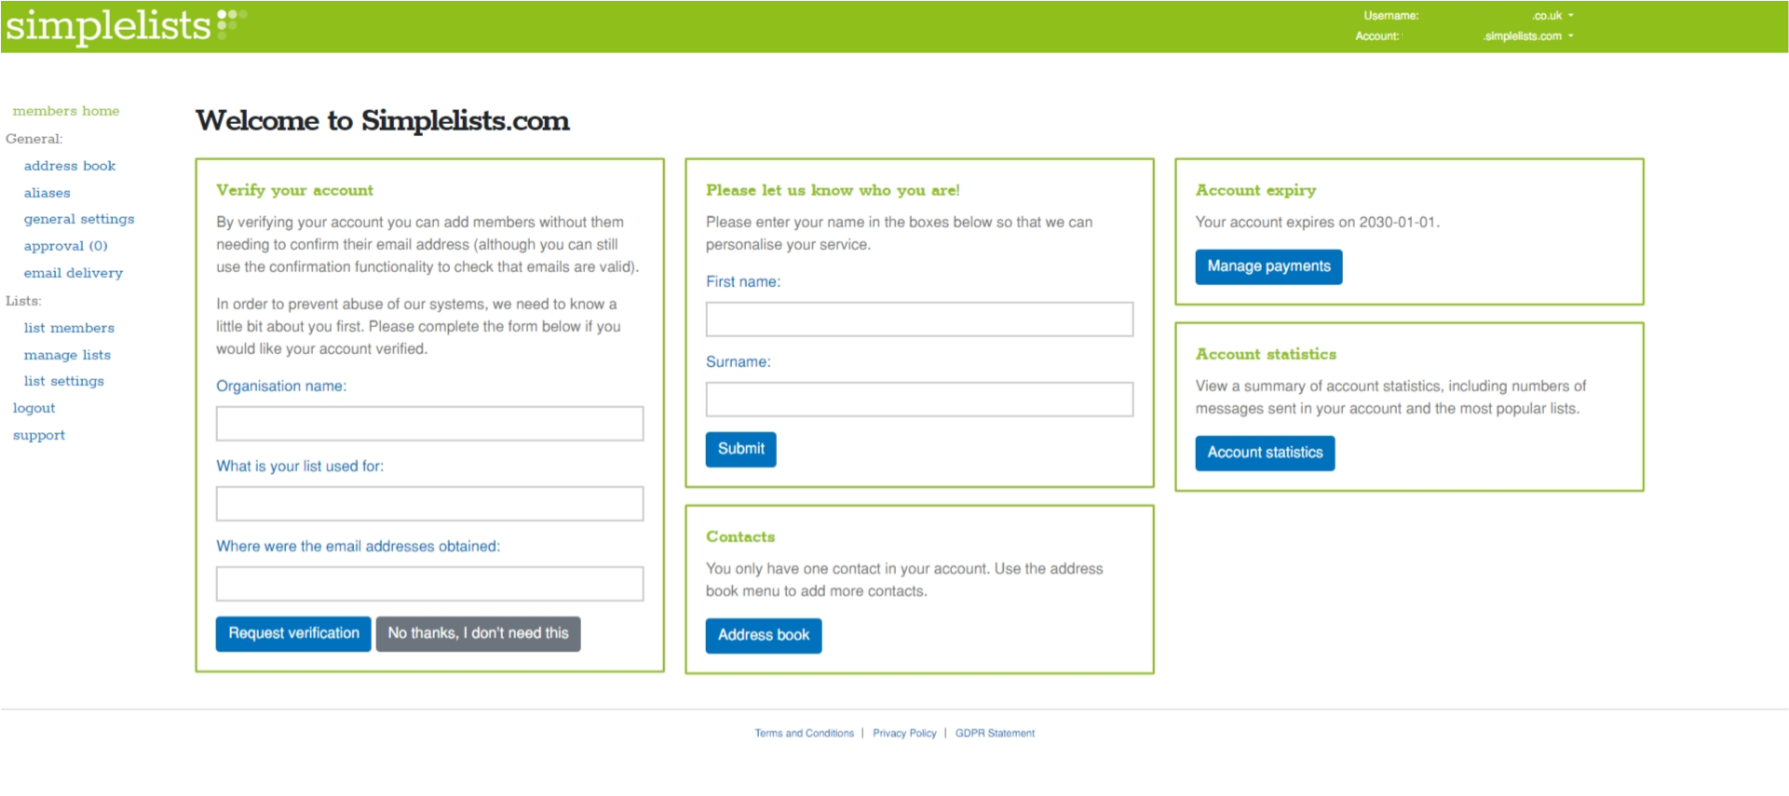 A screenshot of the Simplelists management dashboard